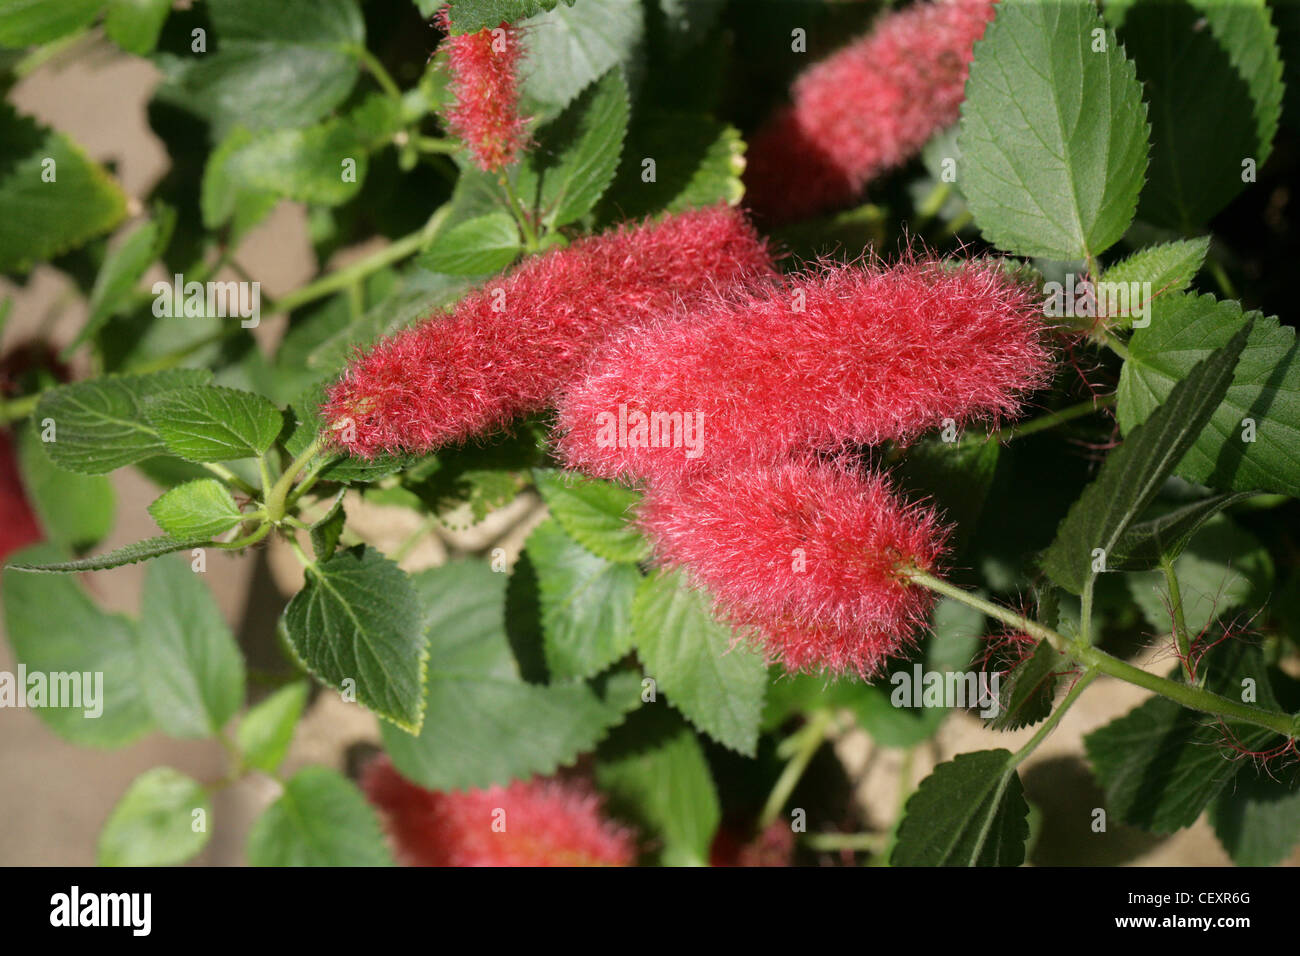 Dwarf Or Trailing Chenille Plant Strawberry Firetails Red Hot Cat S Stock Photo Alamy